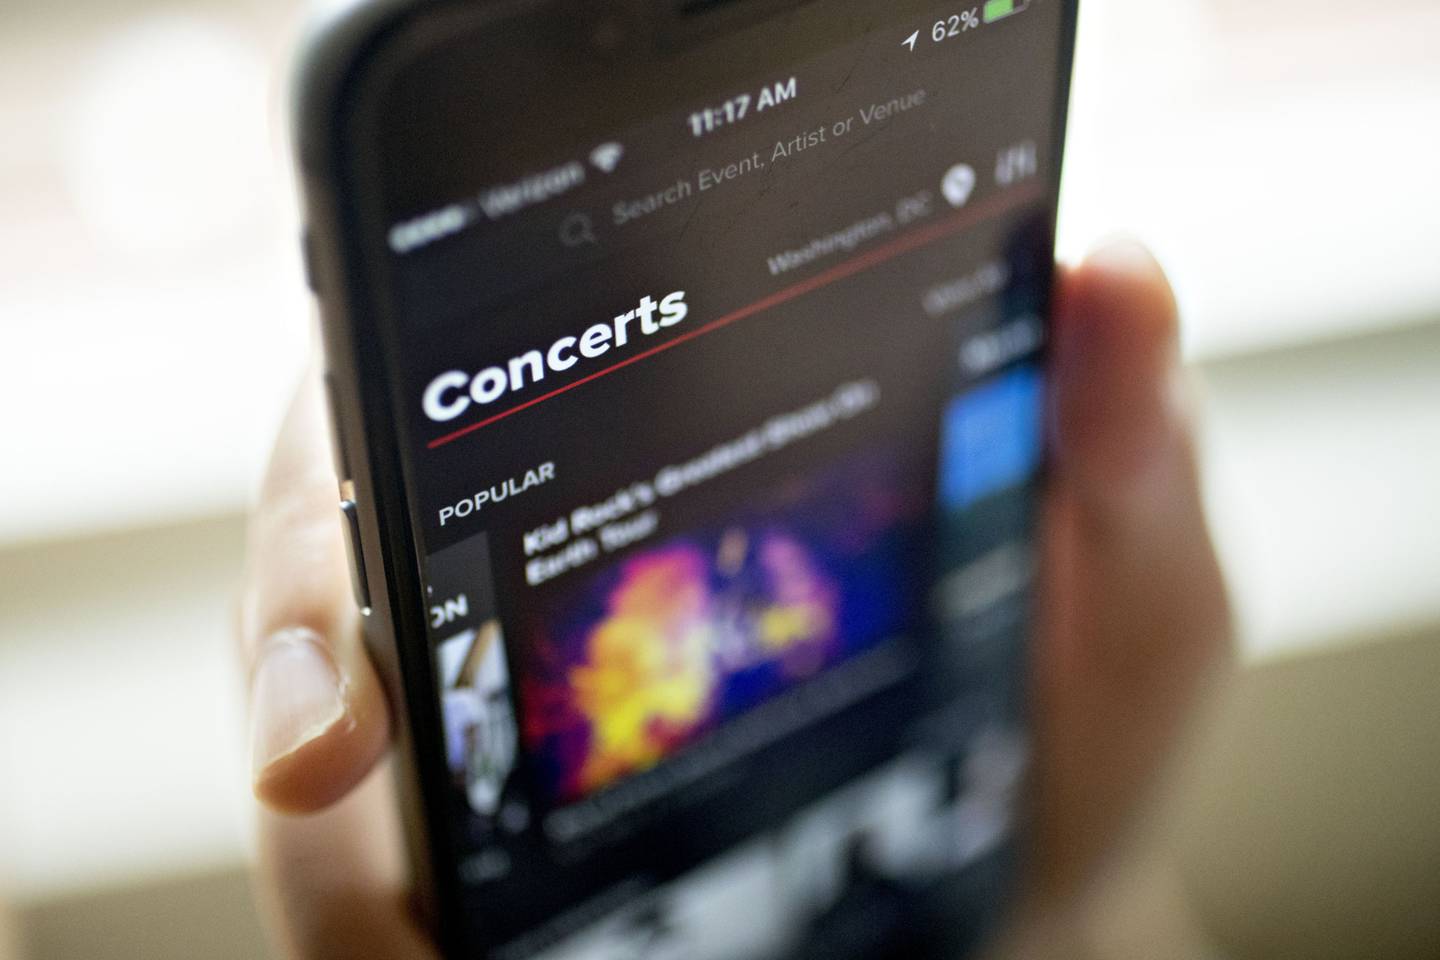 The Live Nation Entertainment Inc. application is displayed for a photograph on an Apple Inc. iPhone in Washington, D.C., U.S.